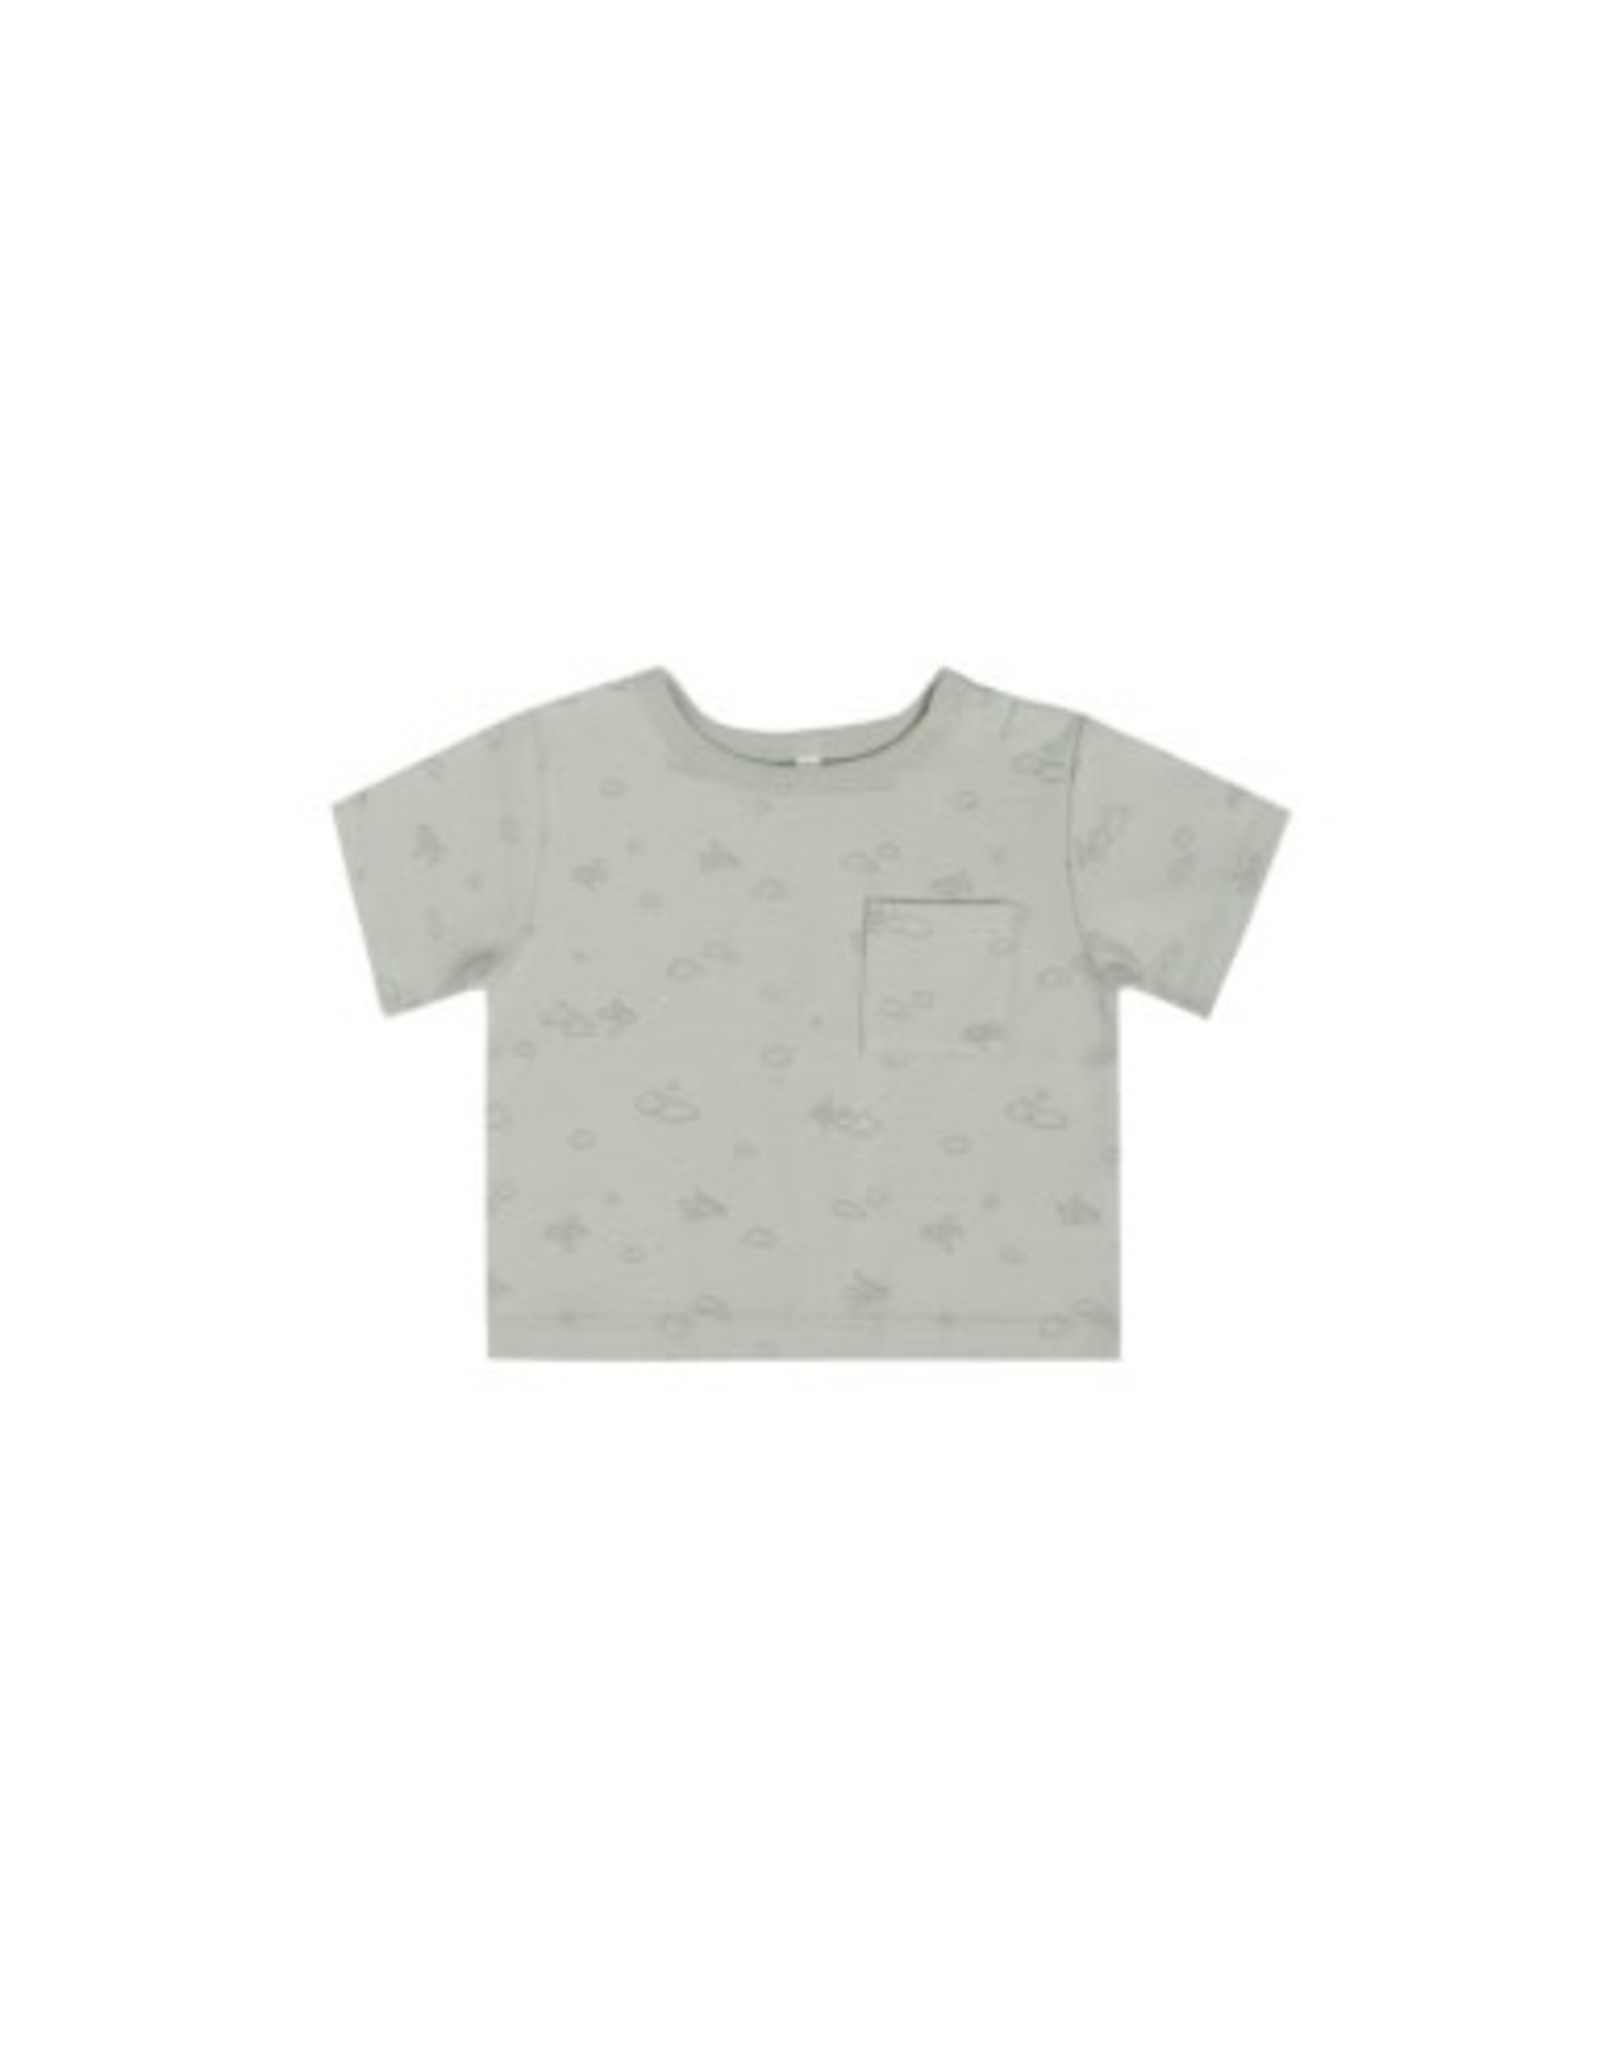 Quincy Mae BOXY POCKET TEE | AIRPLANES